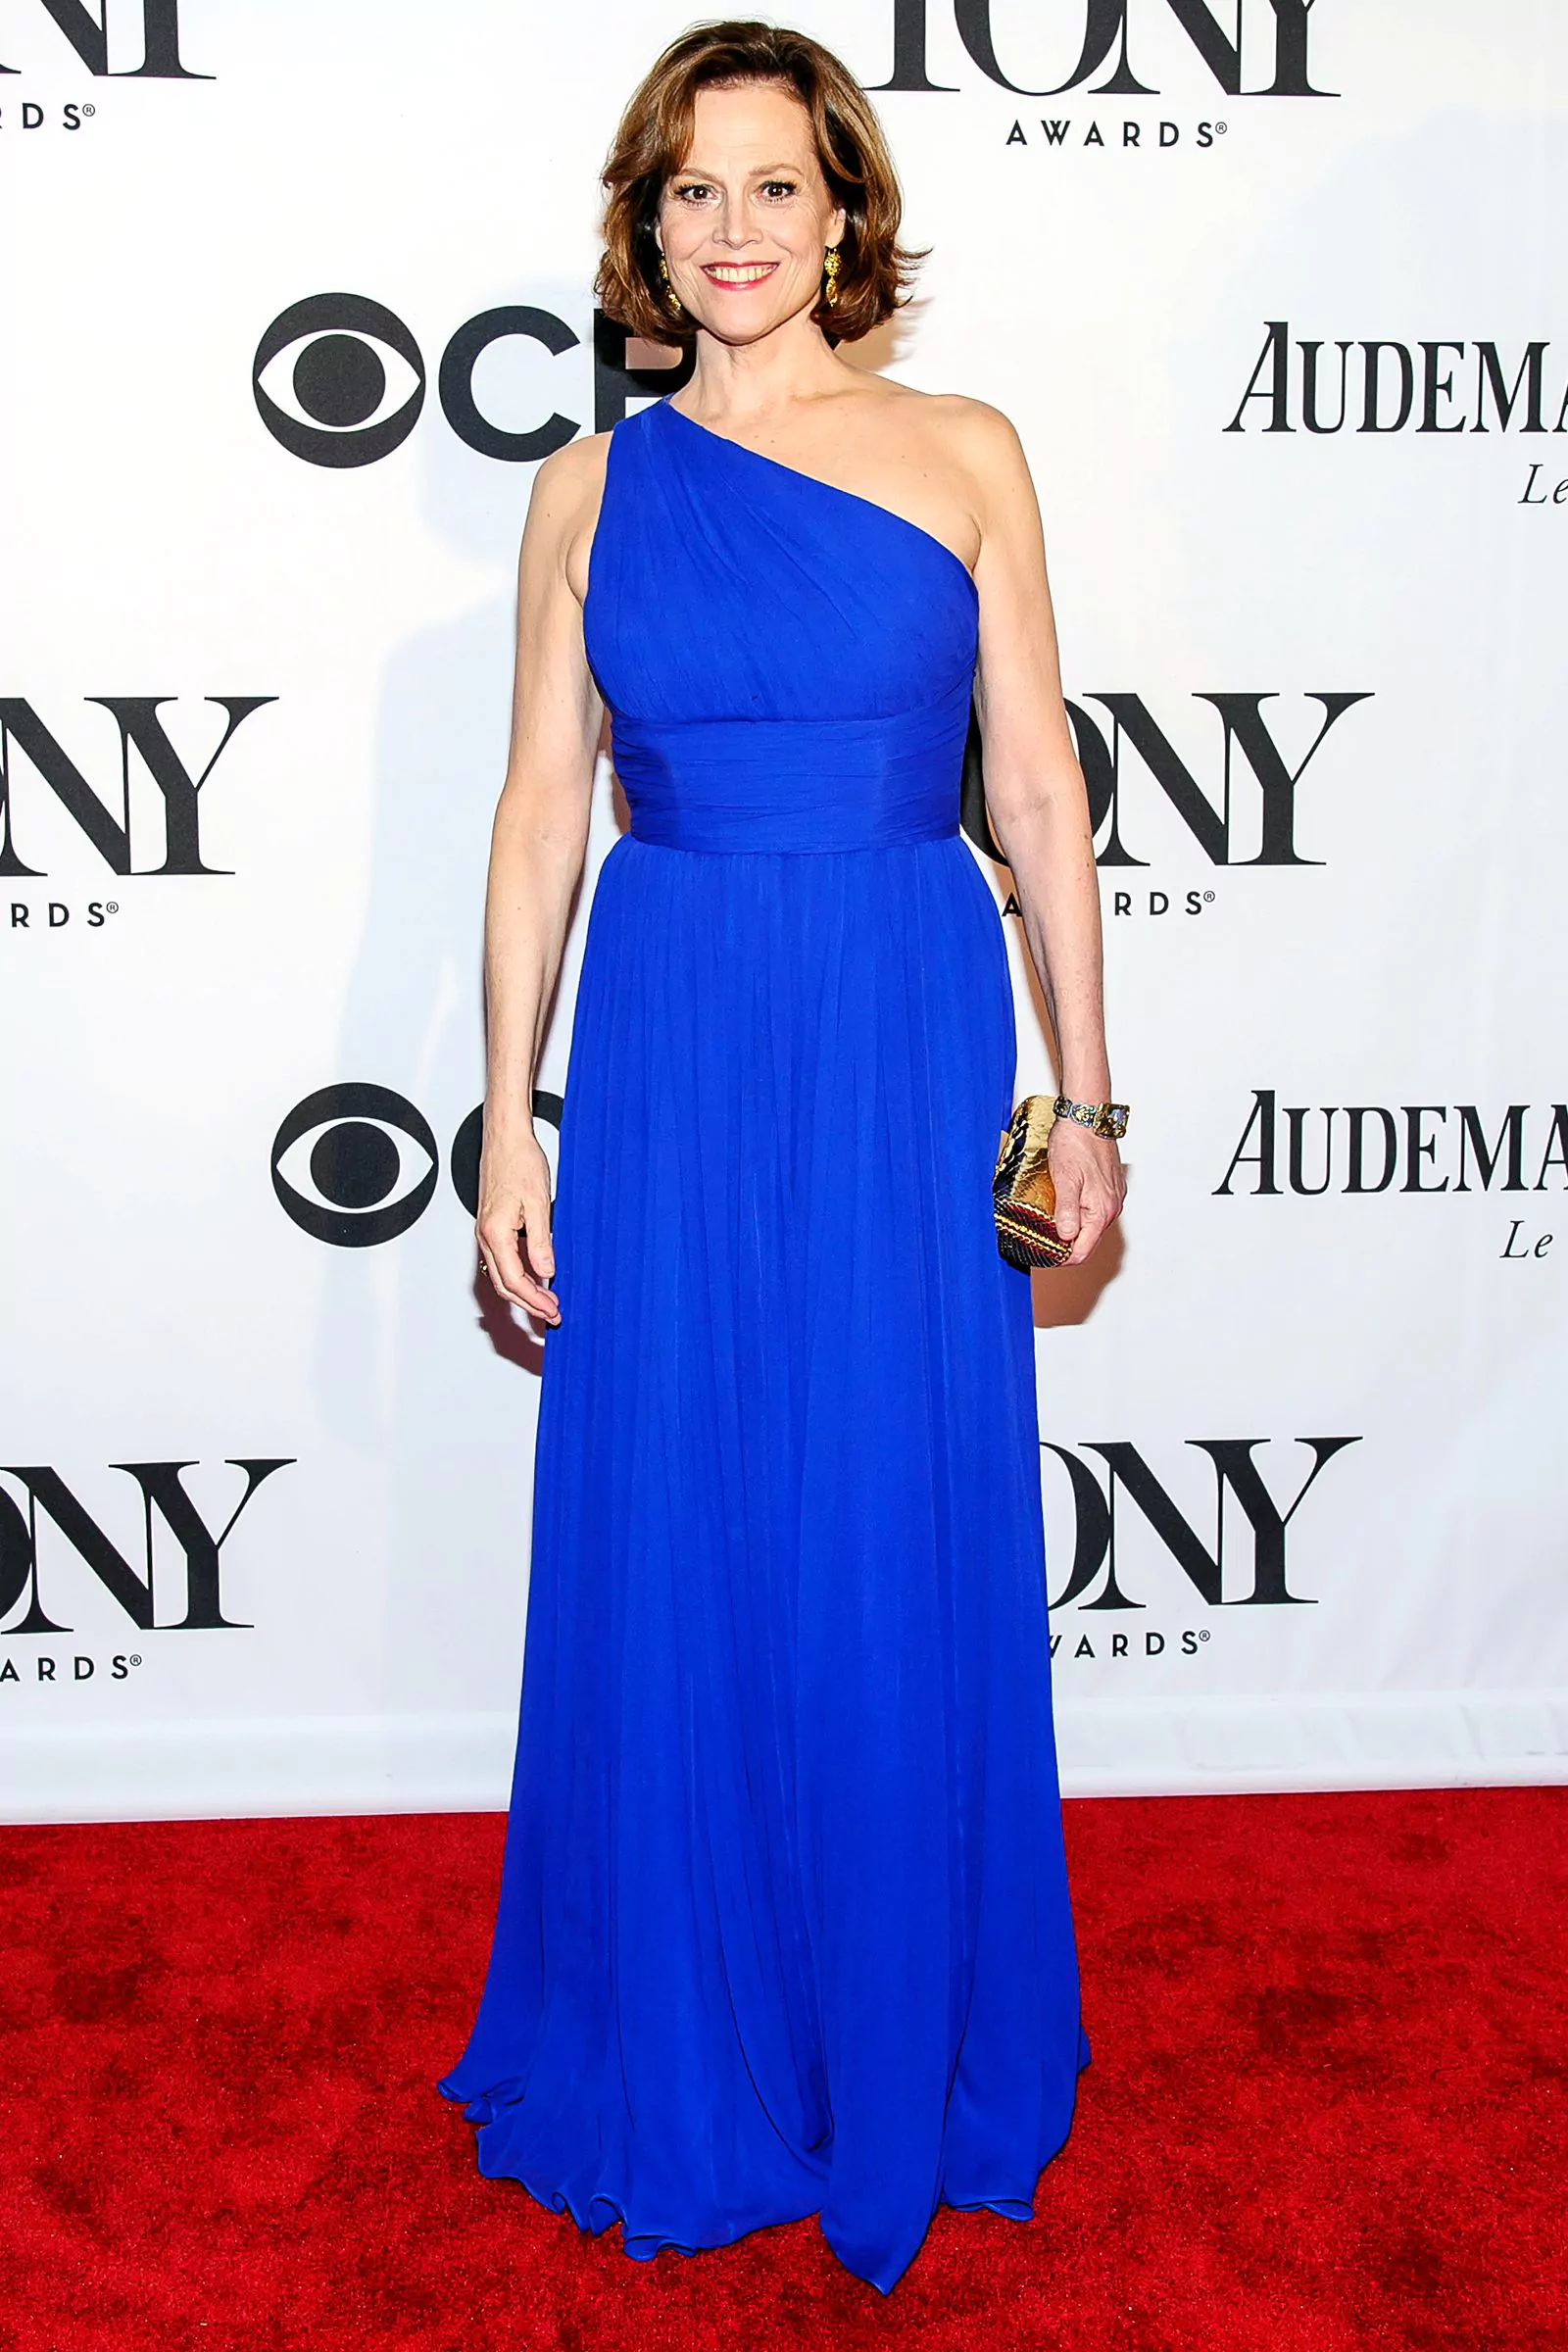 Sigourney Weaver at the 67th Annual Tony Awards in New York City on June 9, 2013.